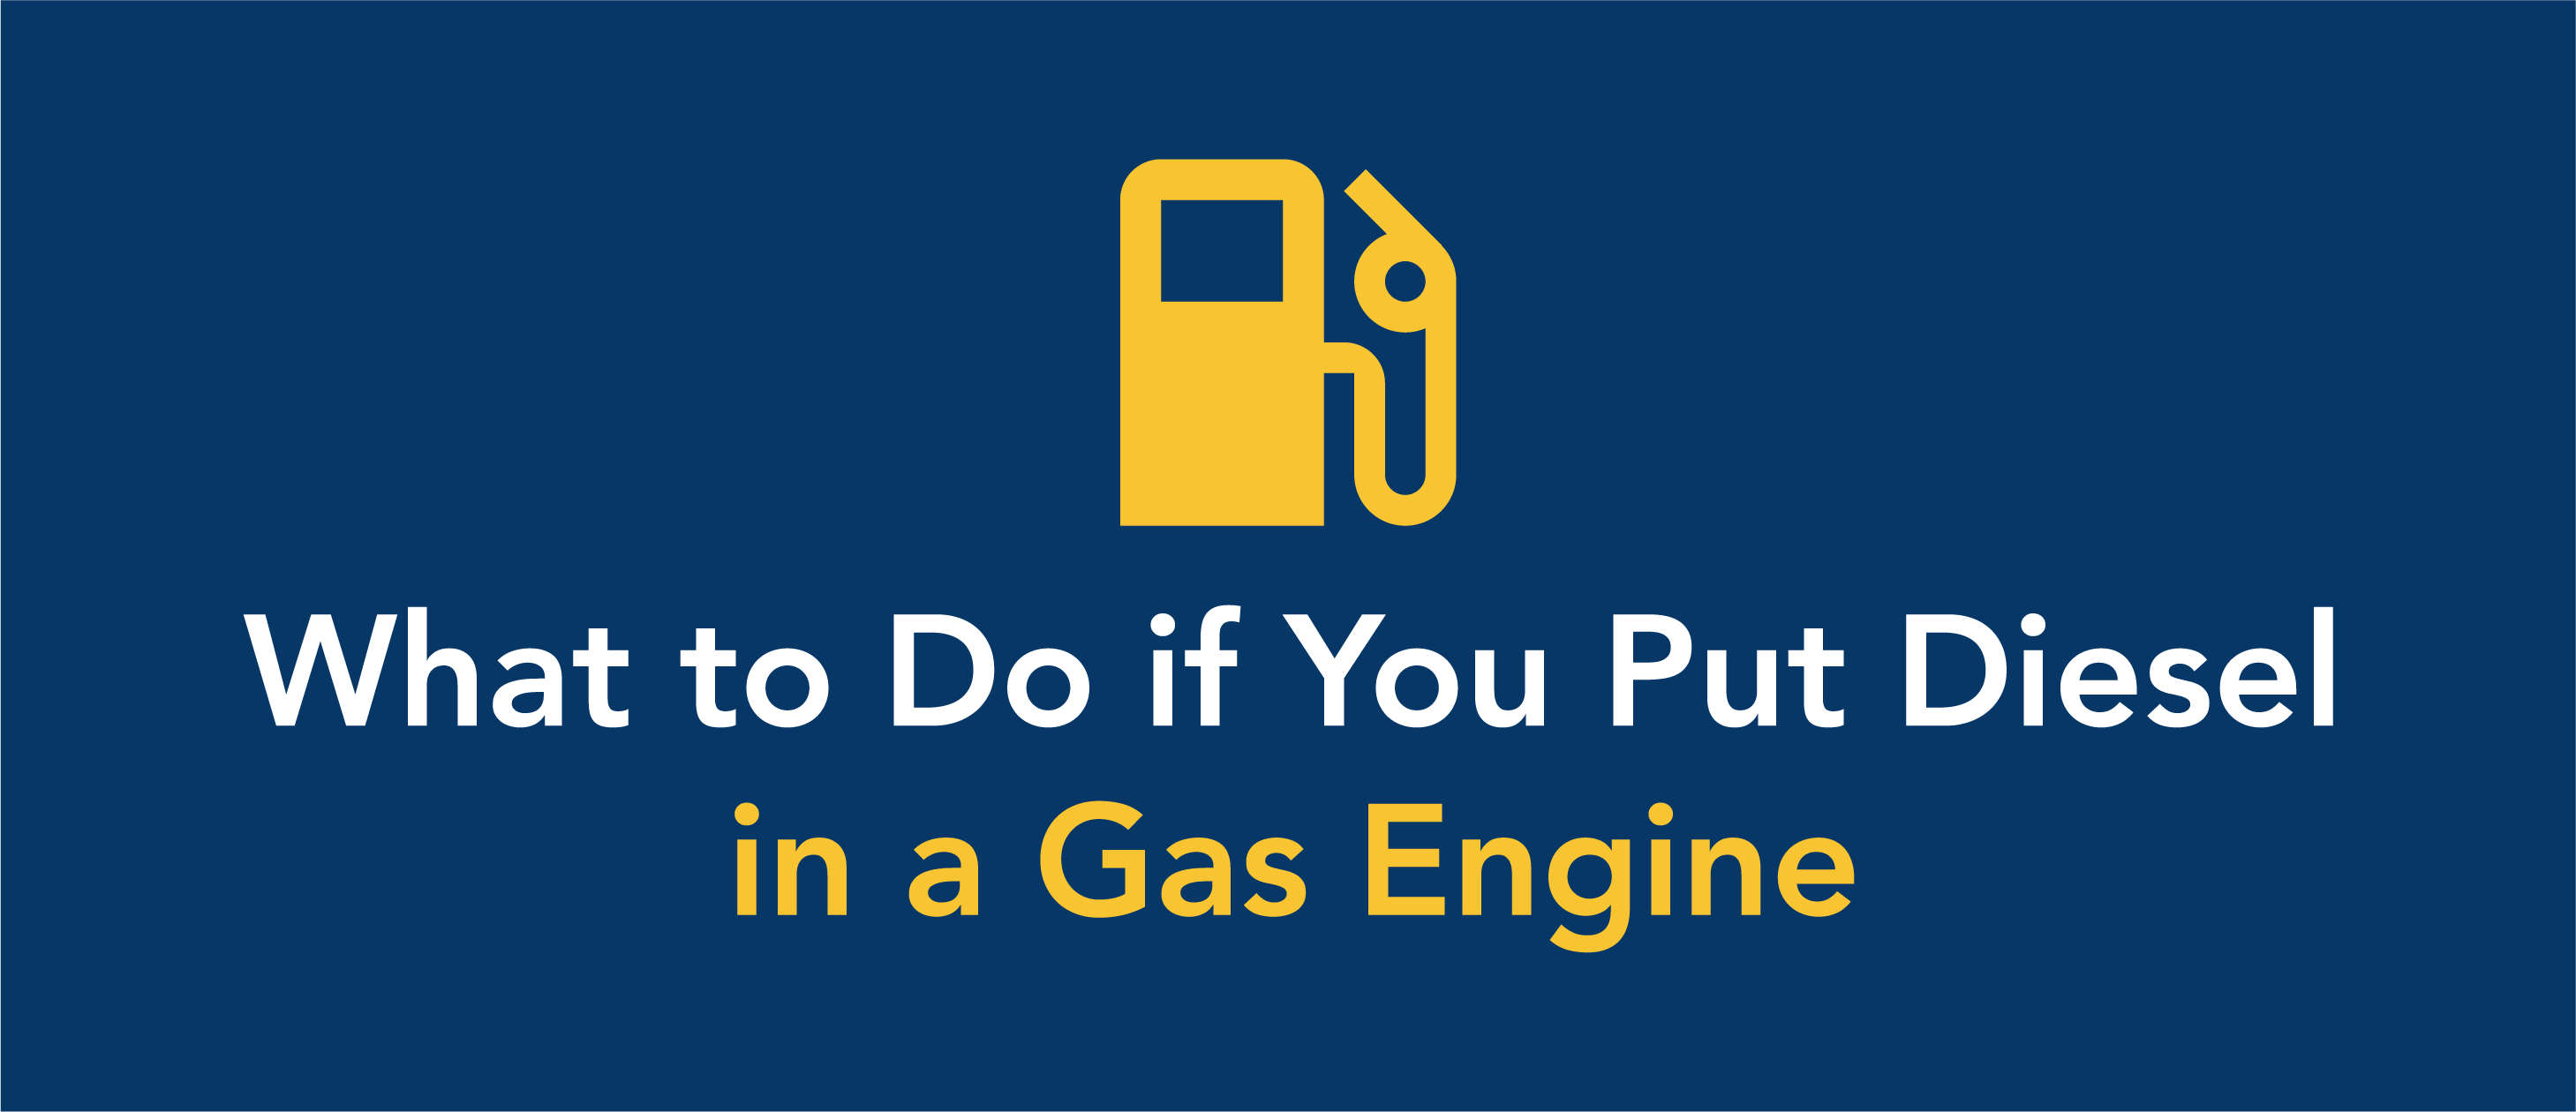 What to do if you put diesel in a gas engine.